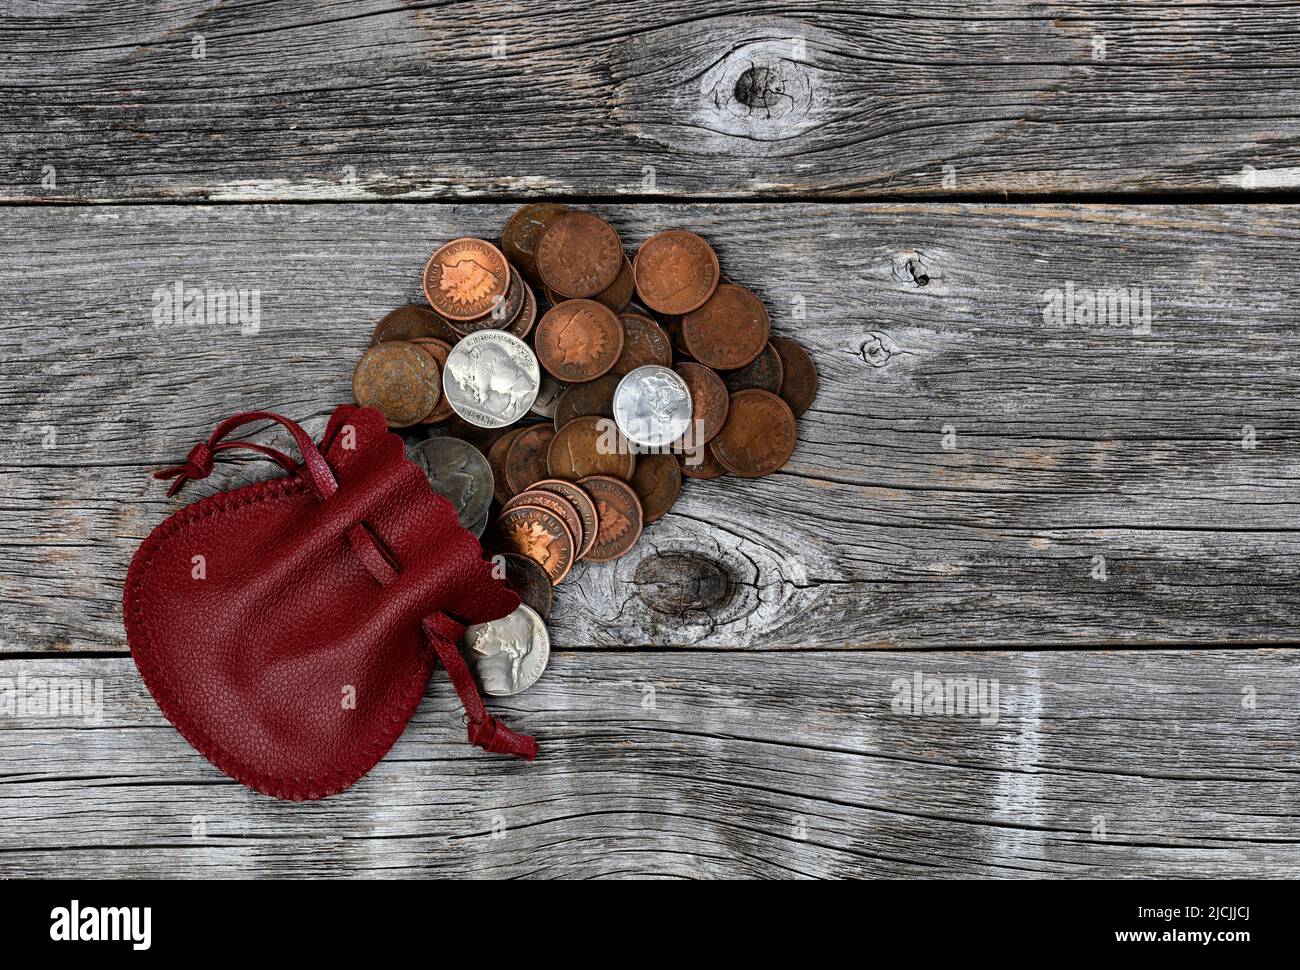 Small red leather bag of United States vintage coins on rustic wood background Stock Photo